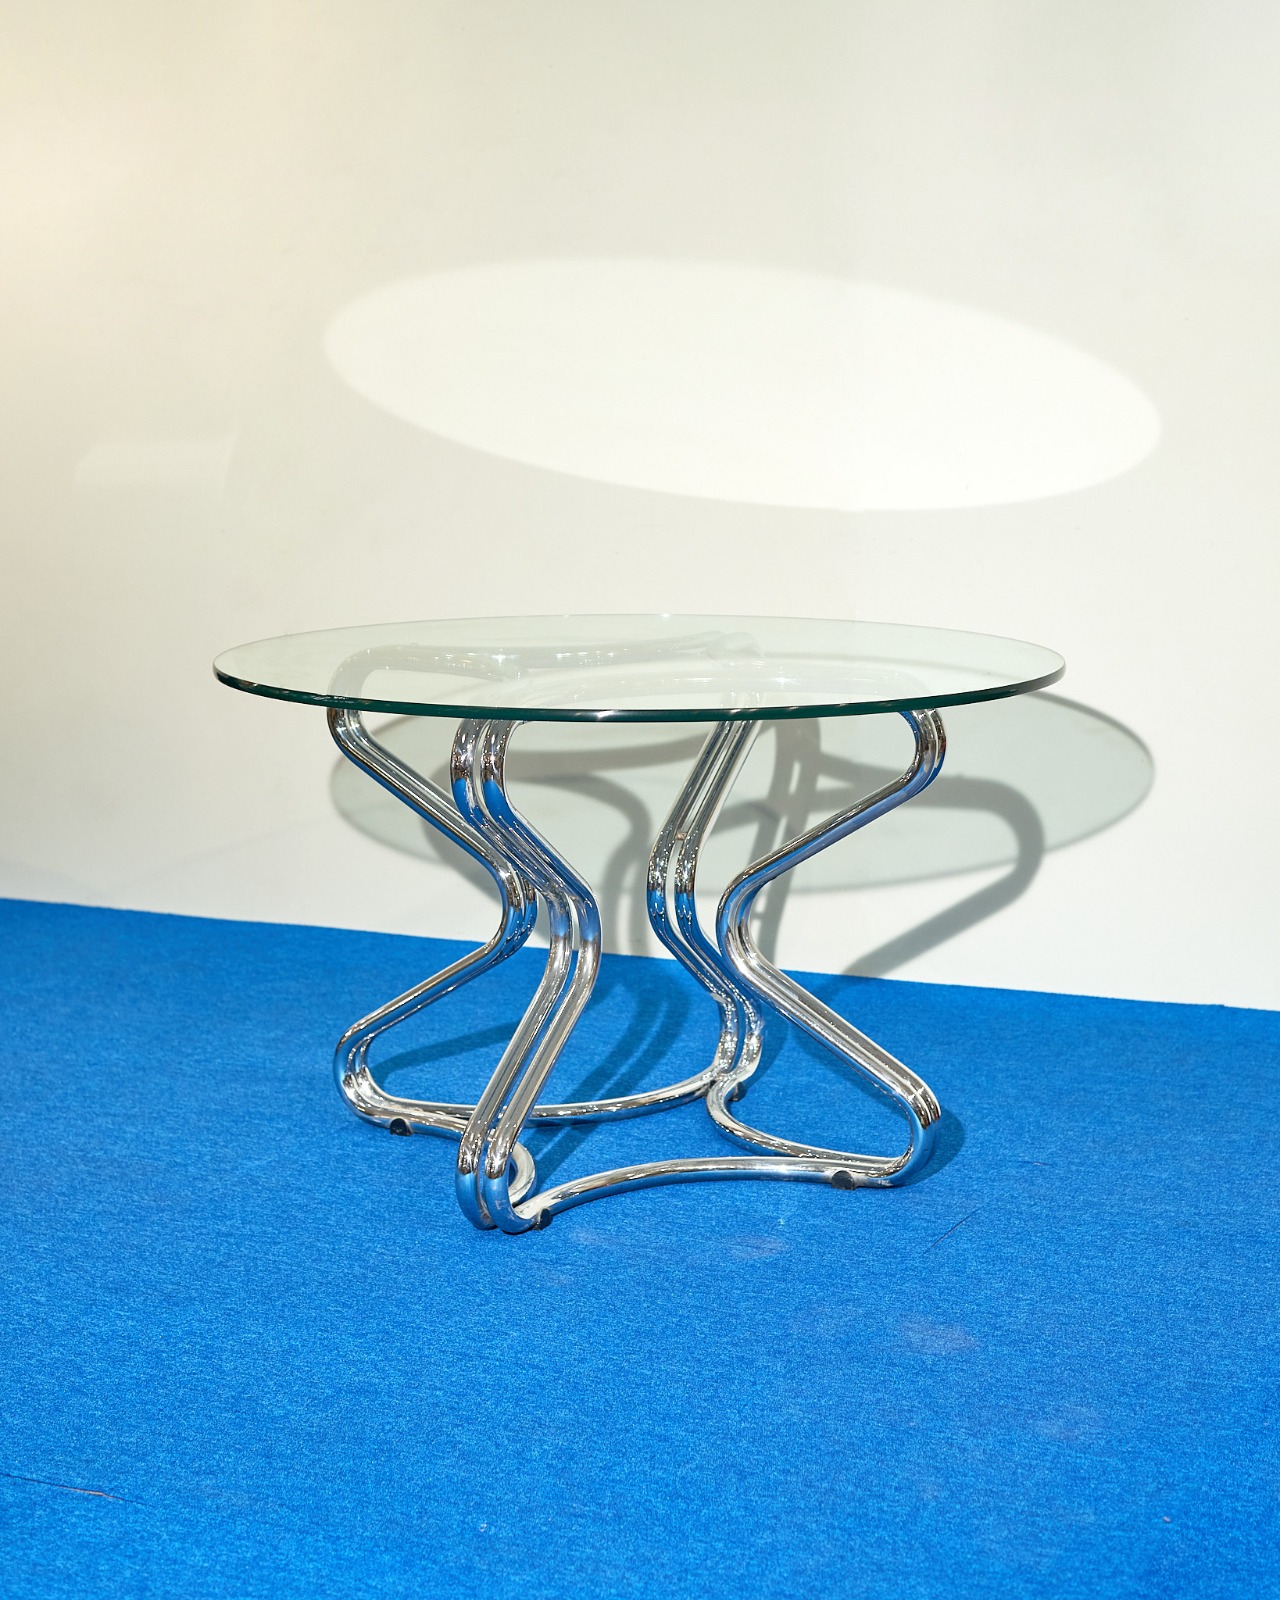 Giotto Stoppino Round Table With Chrome Base 70s